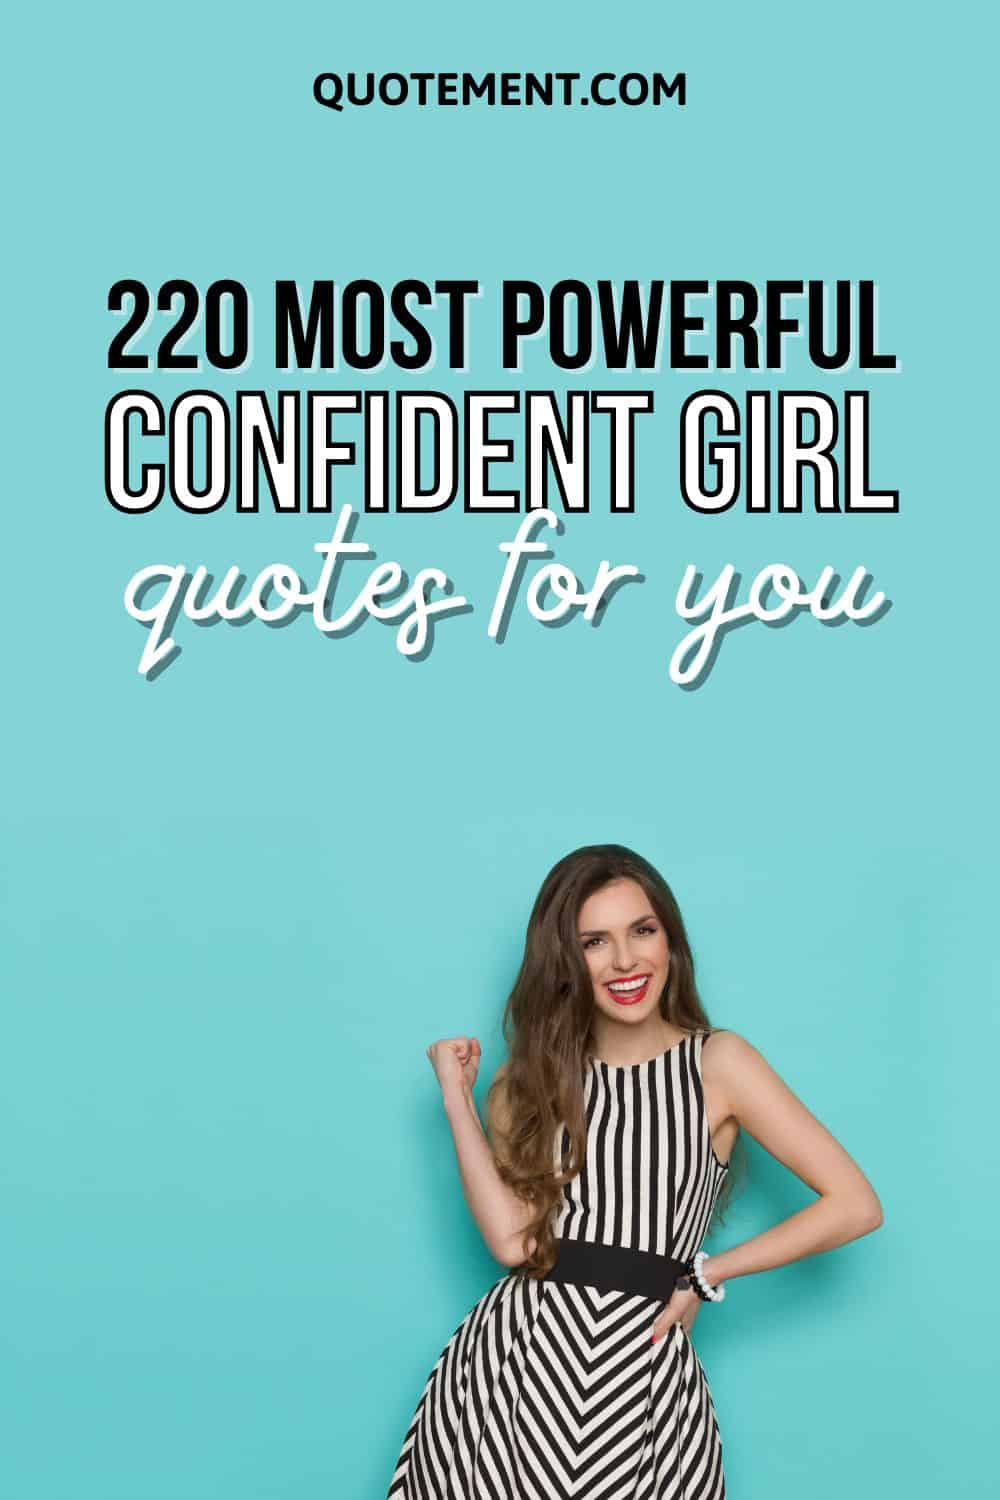 220 Confident Girl Quotes To Uplift You & Motivate You